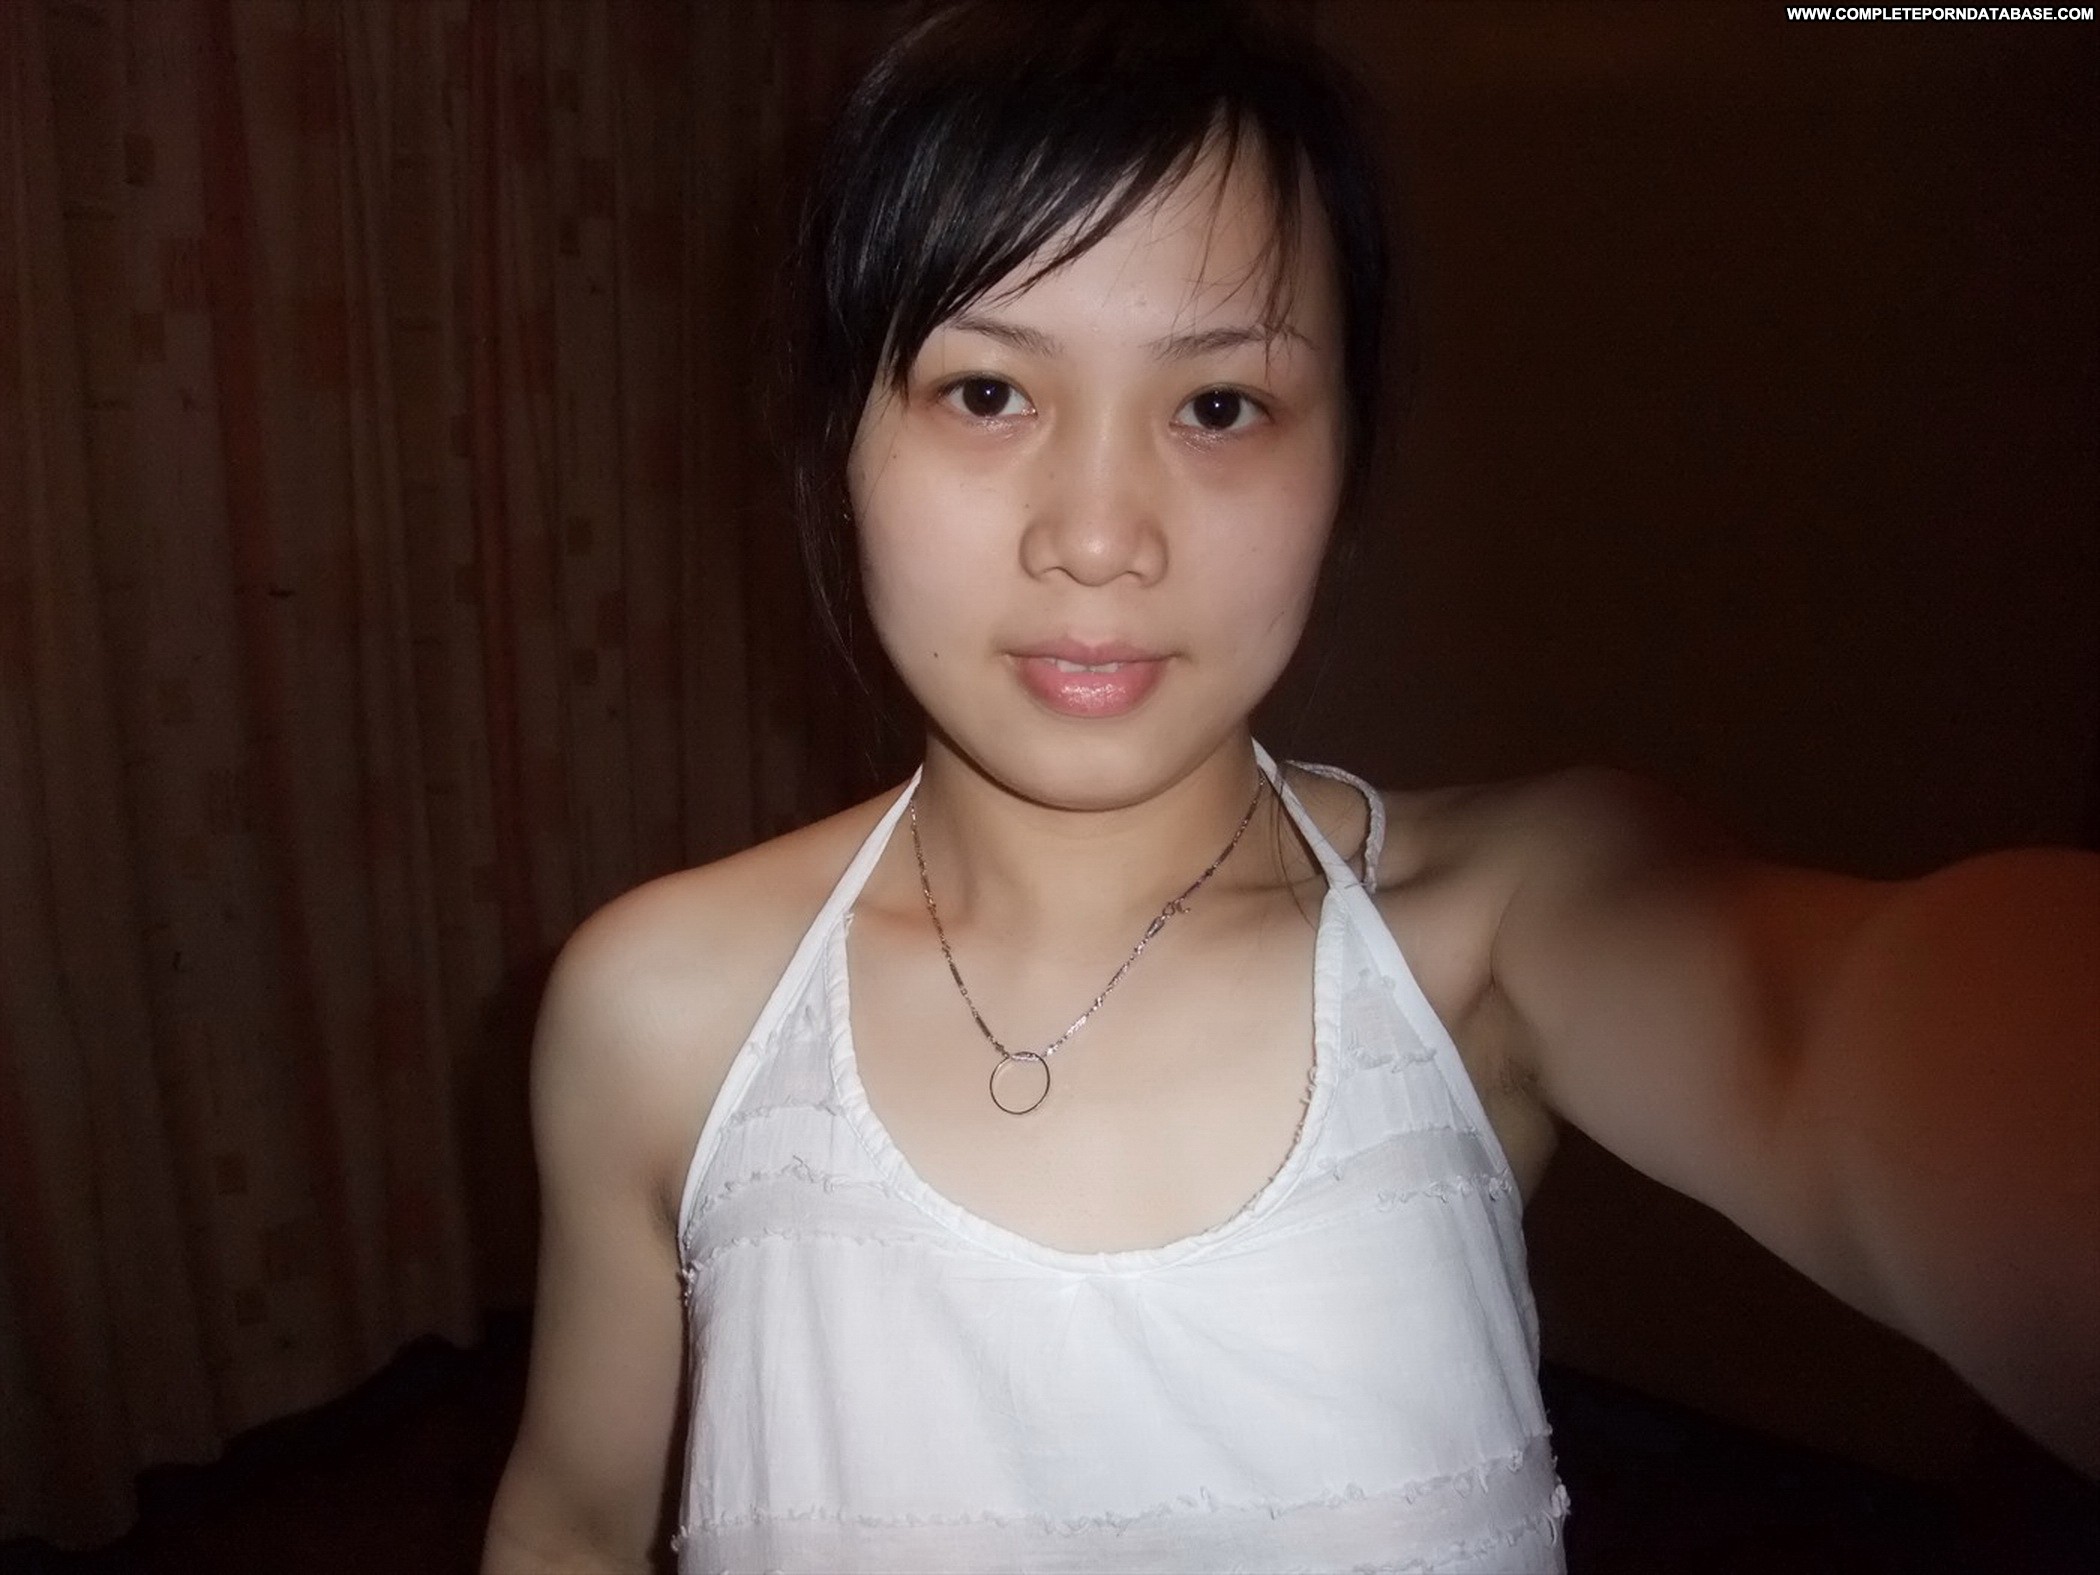 Yahaira Couple Chinese Sex Porn Amateur Sex Naked Riding